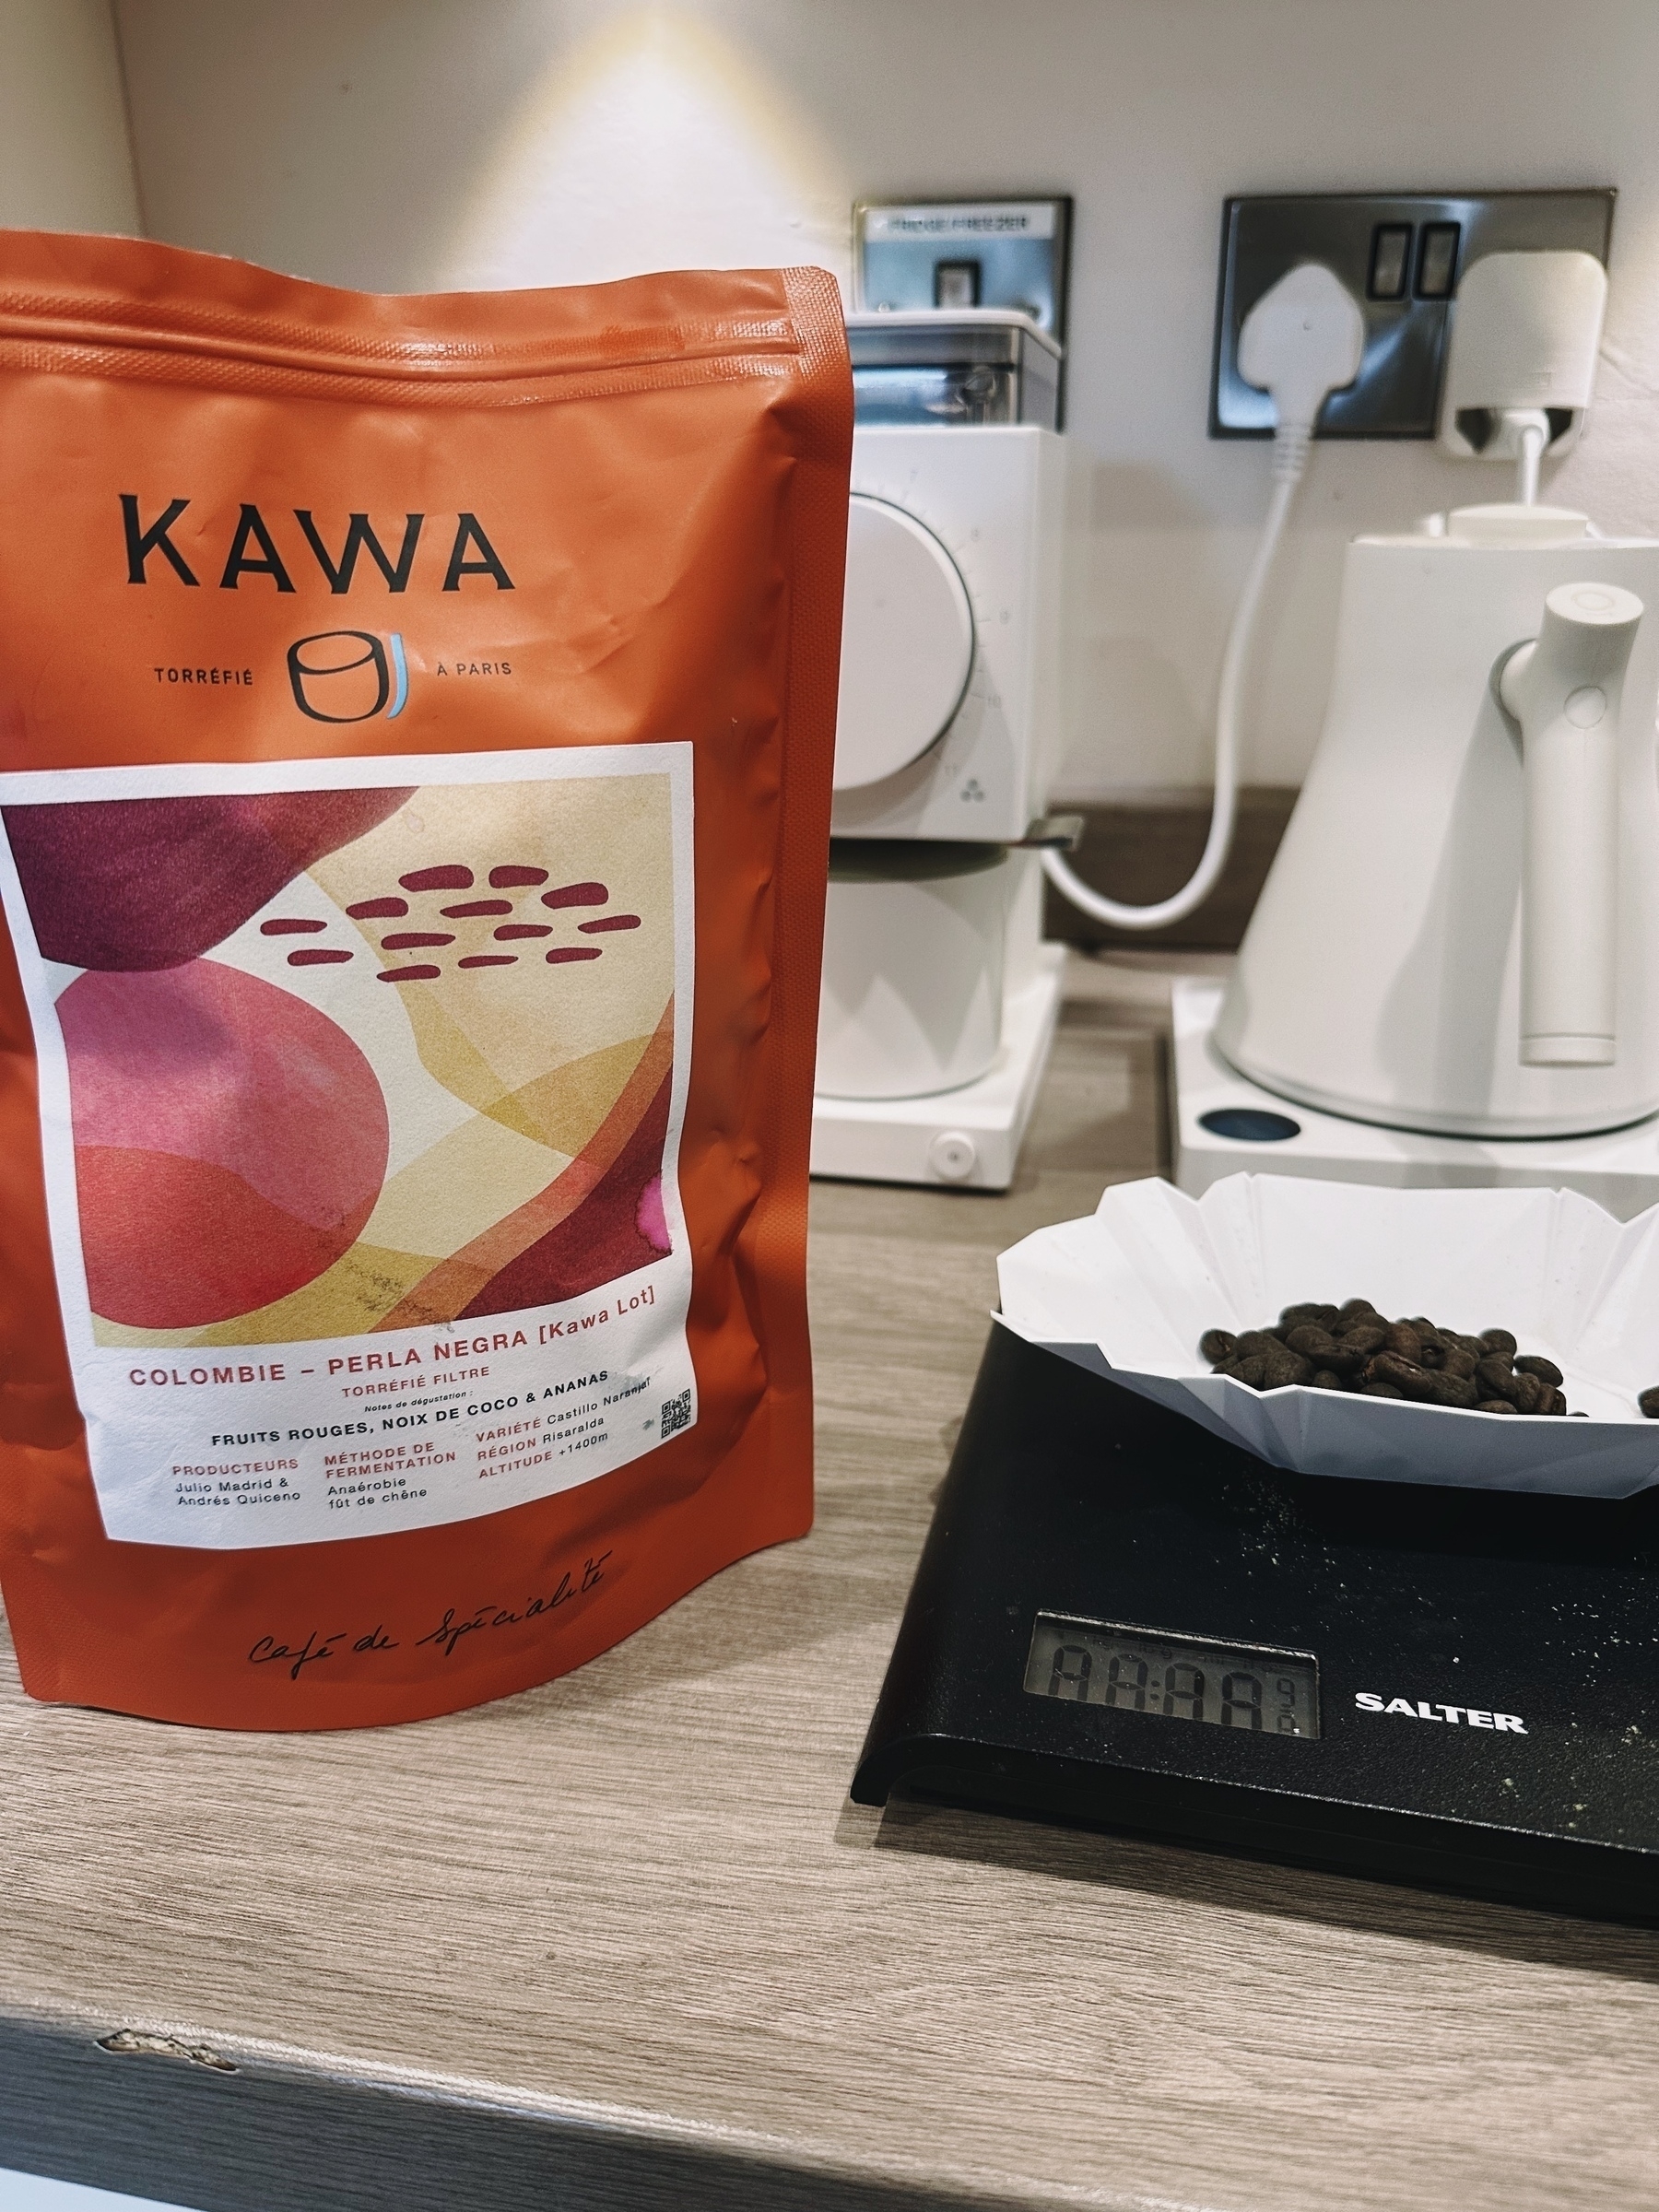 The photo shows a bag of Kawa coffee placed on a kitchen counter. The bag is orange and labeled with "Kawa," indicating it contains Colombian Perla Negra coffee beans. In the background, there is a white coffee machine and an electric kettle. In the foreground, coffee beans are placed on a white paper filter resting on a digital scale, which displays a reading of "0.00."